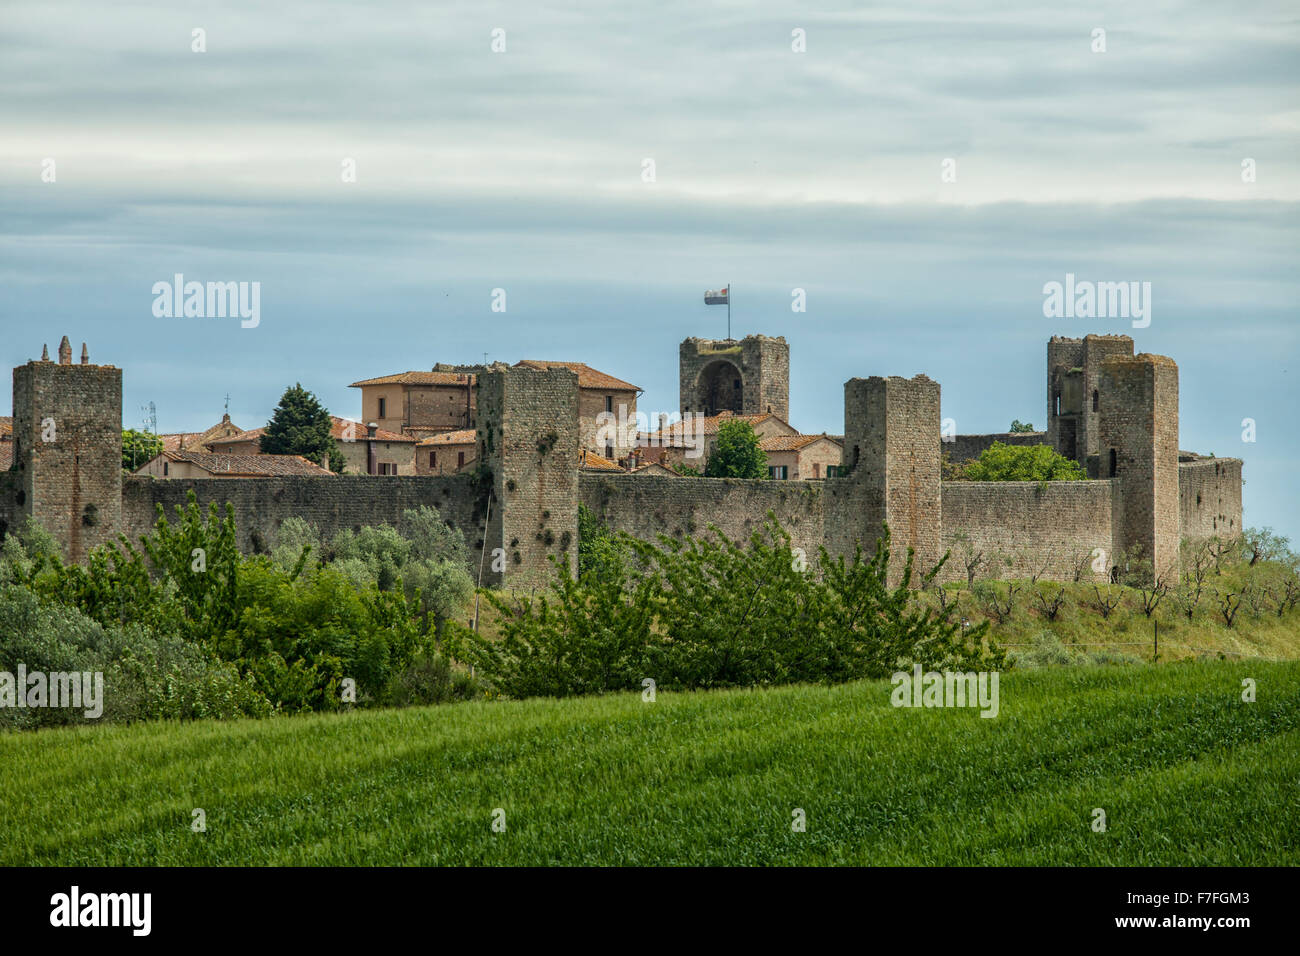 The medieval  walled town of Monteriggioni Stock Photo